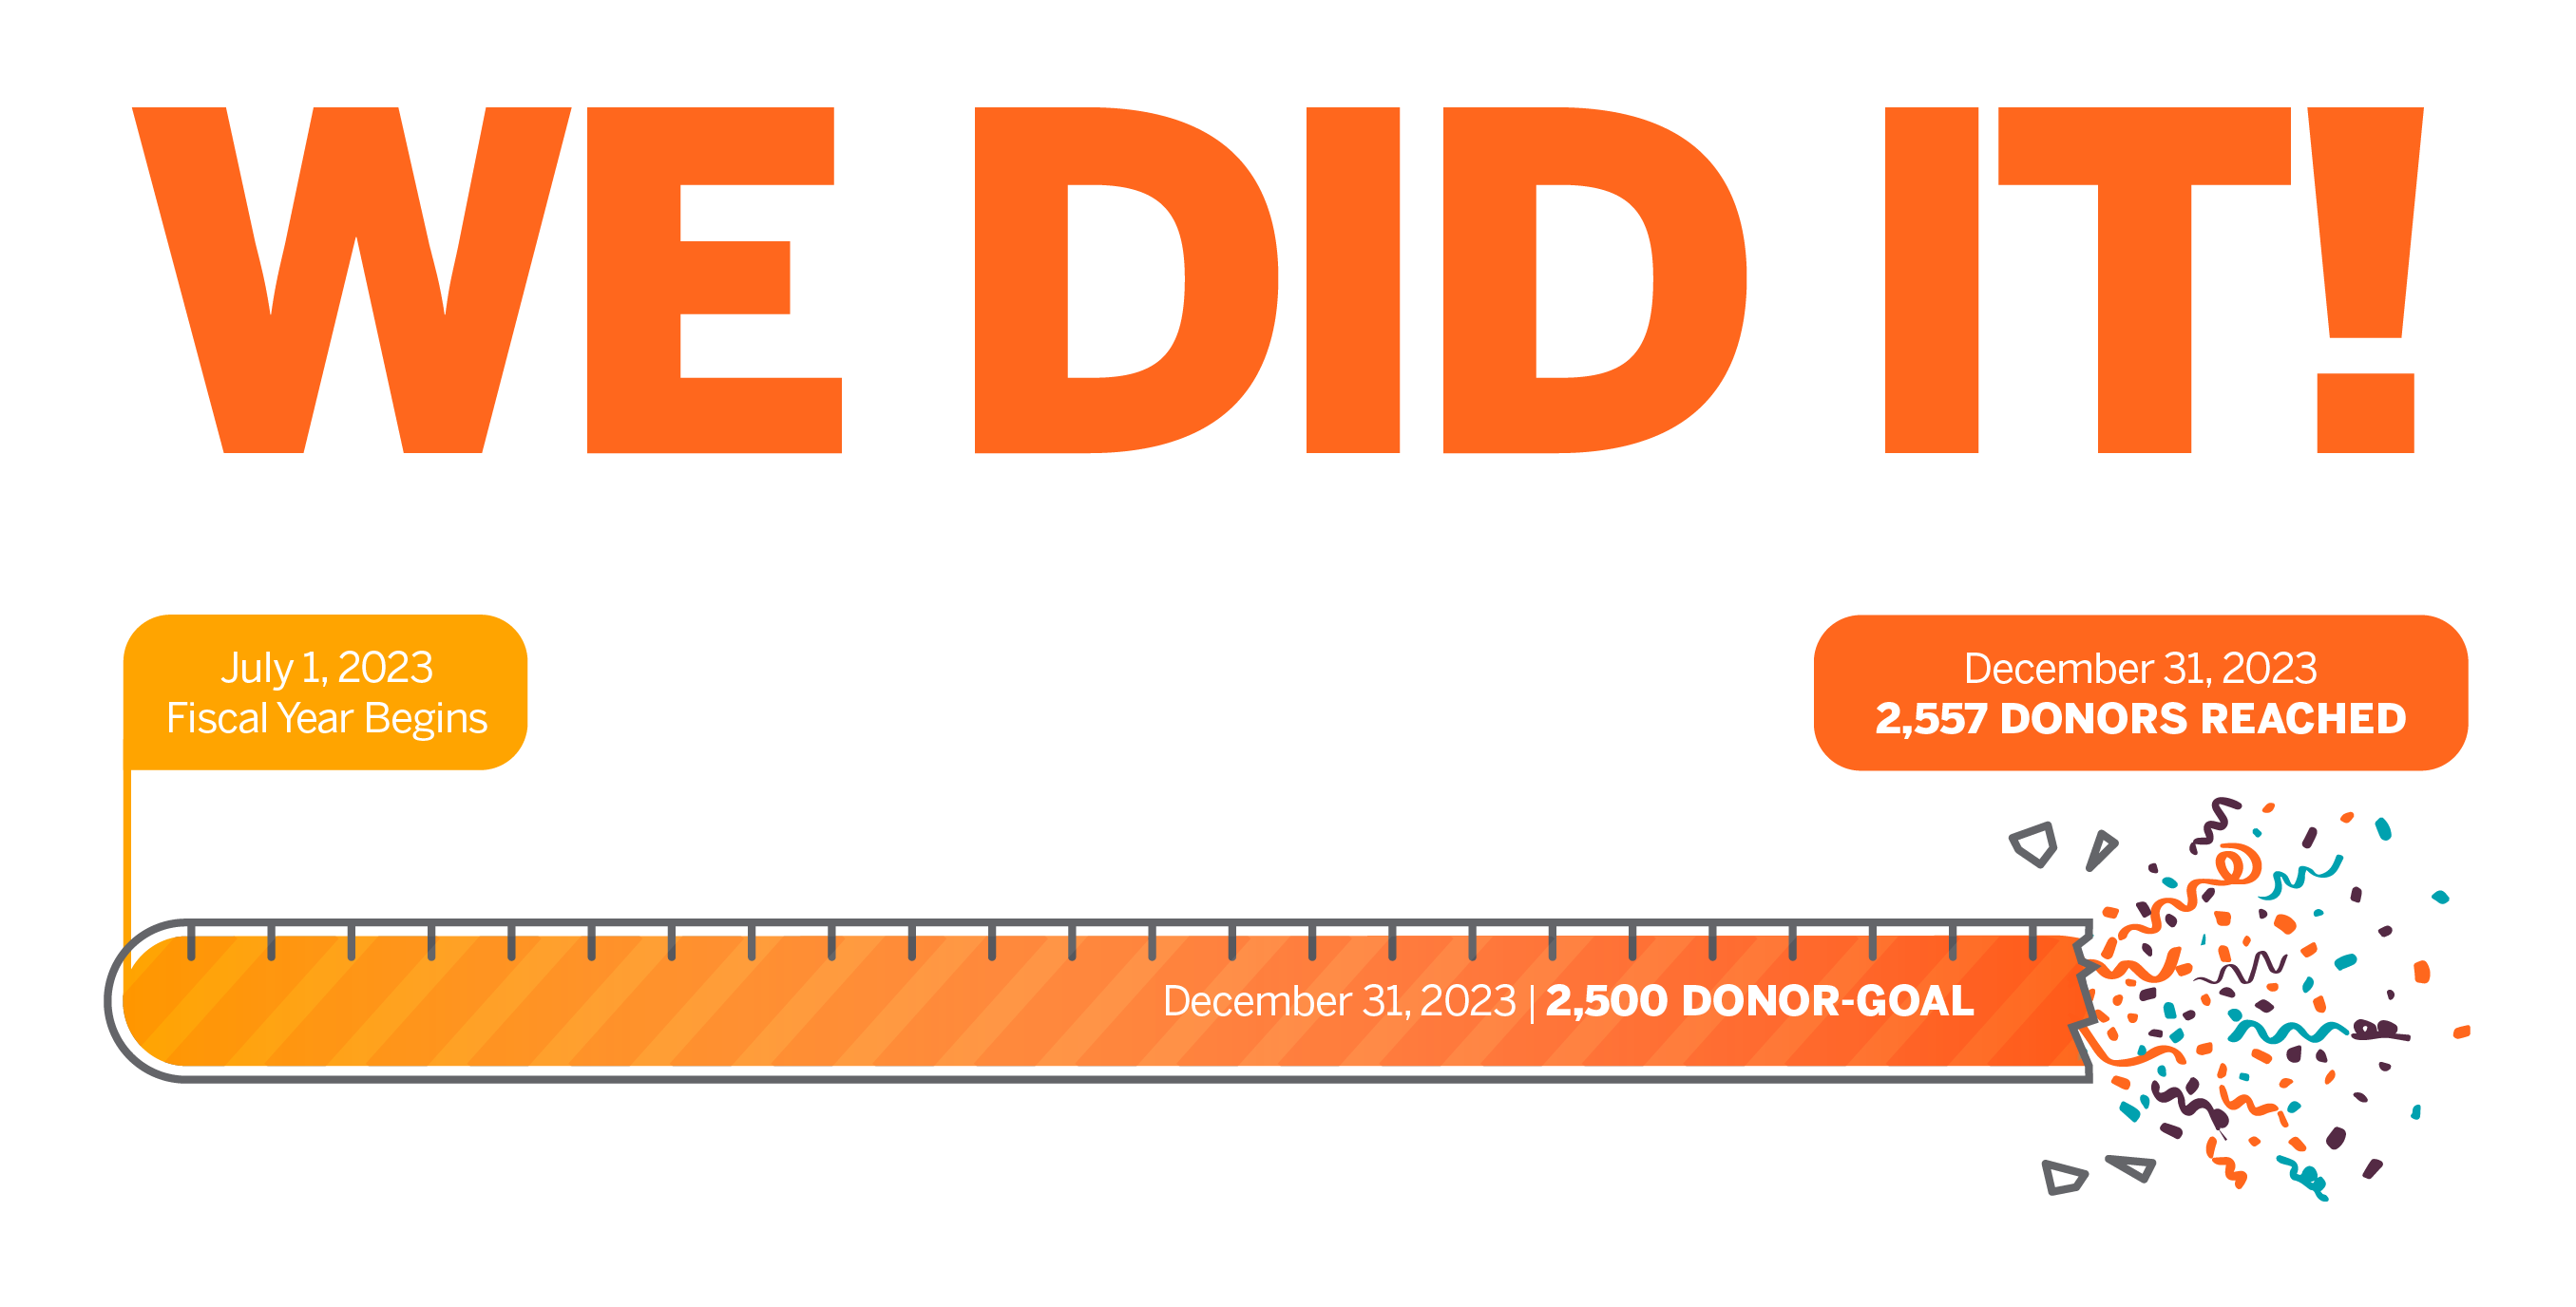 A progress bar showing 1,808 donors on December 12, 2023